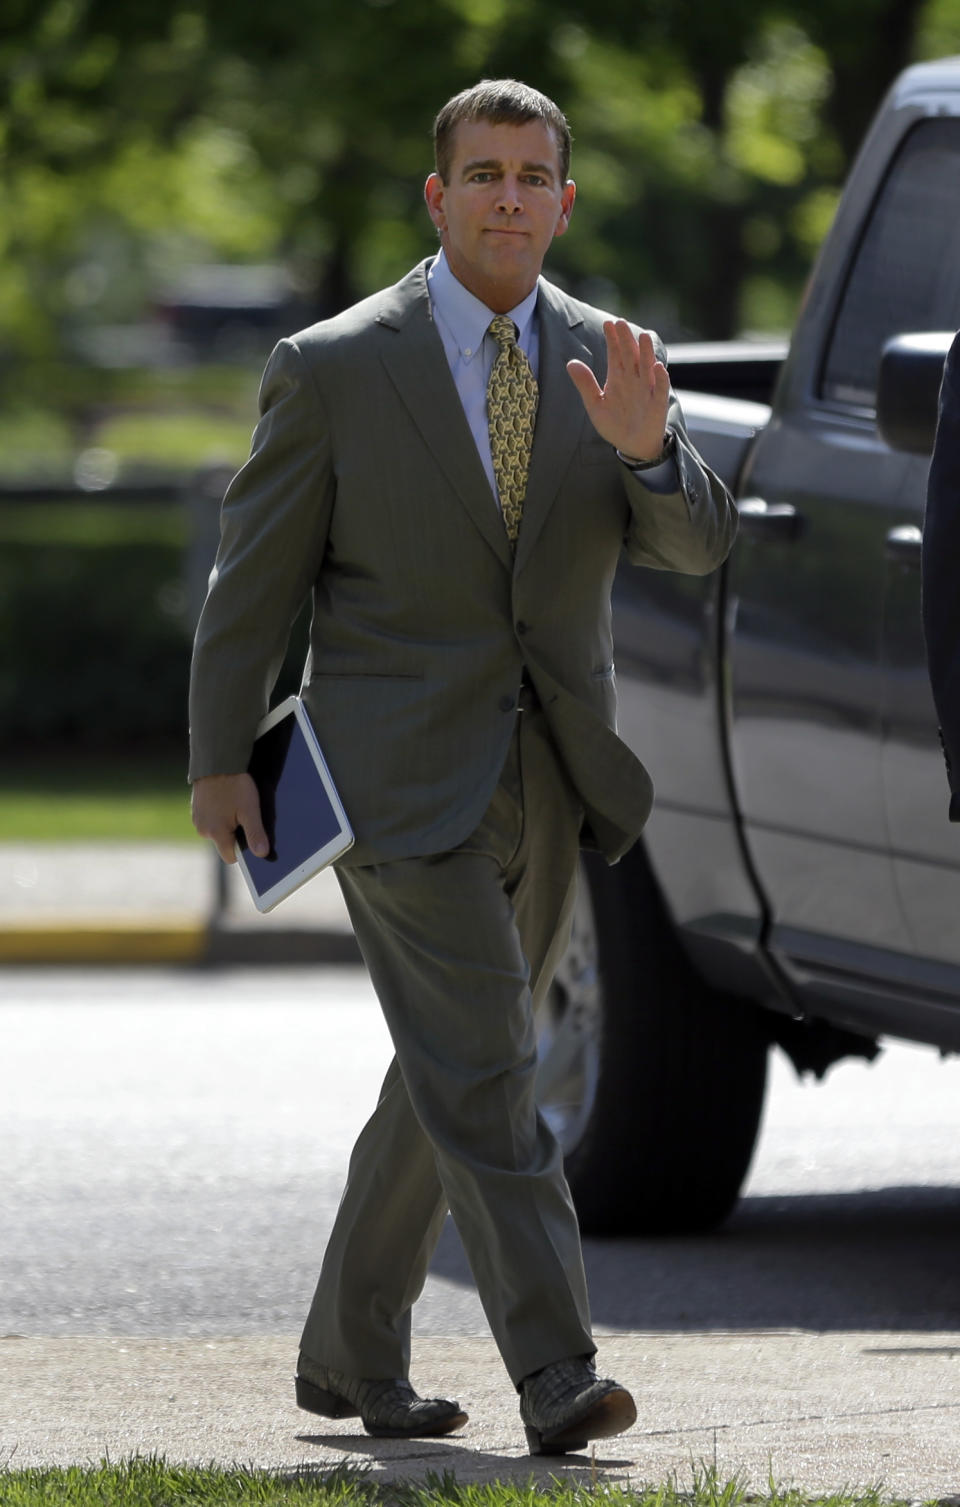 Former Anheuser-Busch CEO August Busch IV waves as he enters the Civil Court building before testifying in a gender discrimination lawsuit Tuesday, May 6, 2014, in St. Louis. Francine Katz, former vice president of communications and consumer affairs for the maker of Budweiser, Bud Light and other beers, is suing Anheuser-Busch for gender discrimination. (AP Photo/Jeff Roberson)